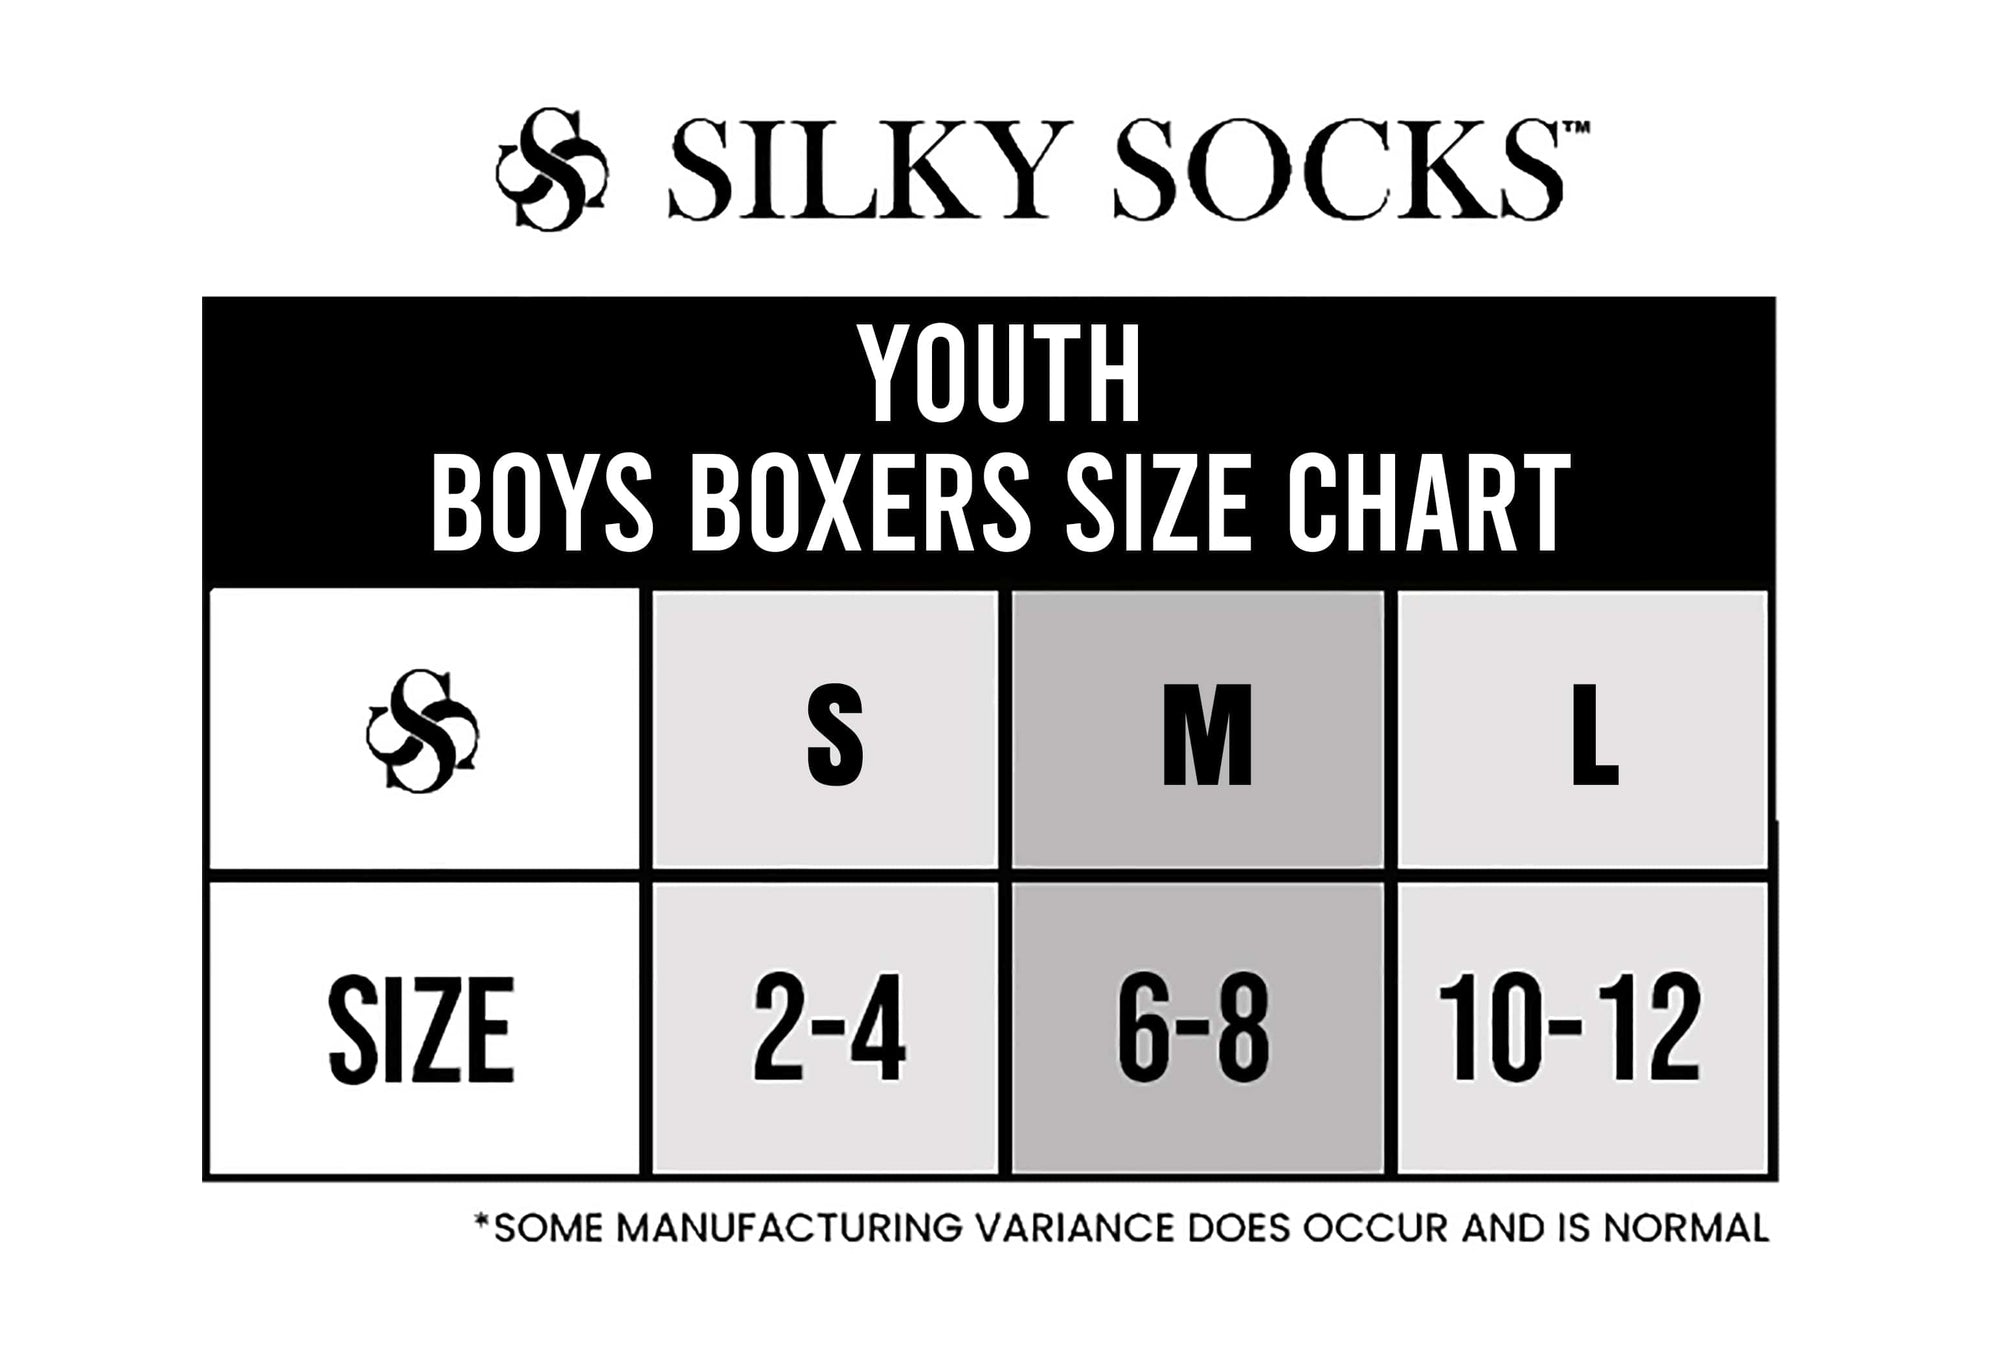 Boys (Youth) Boxers